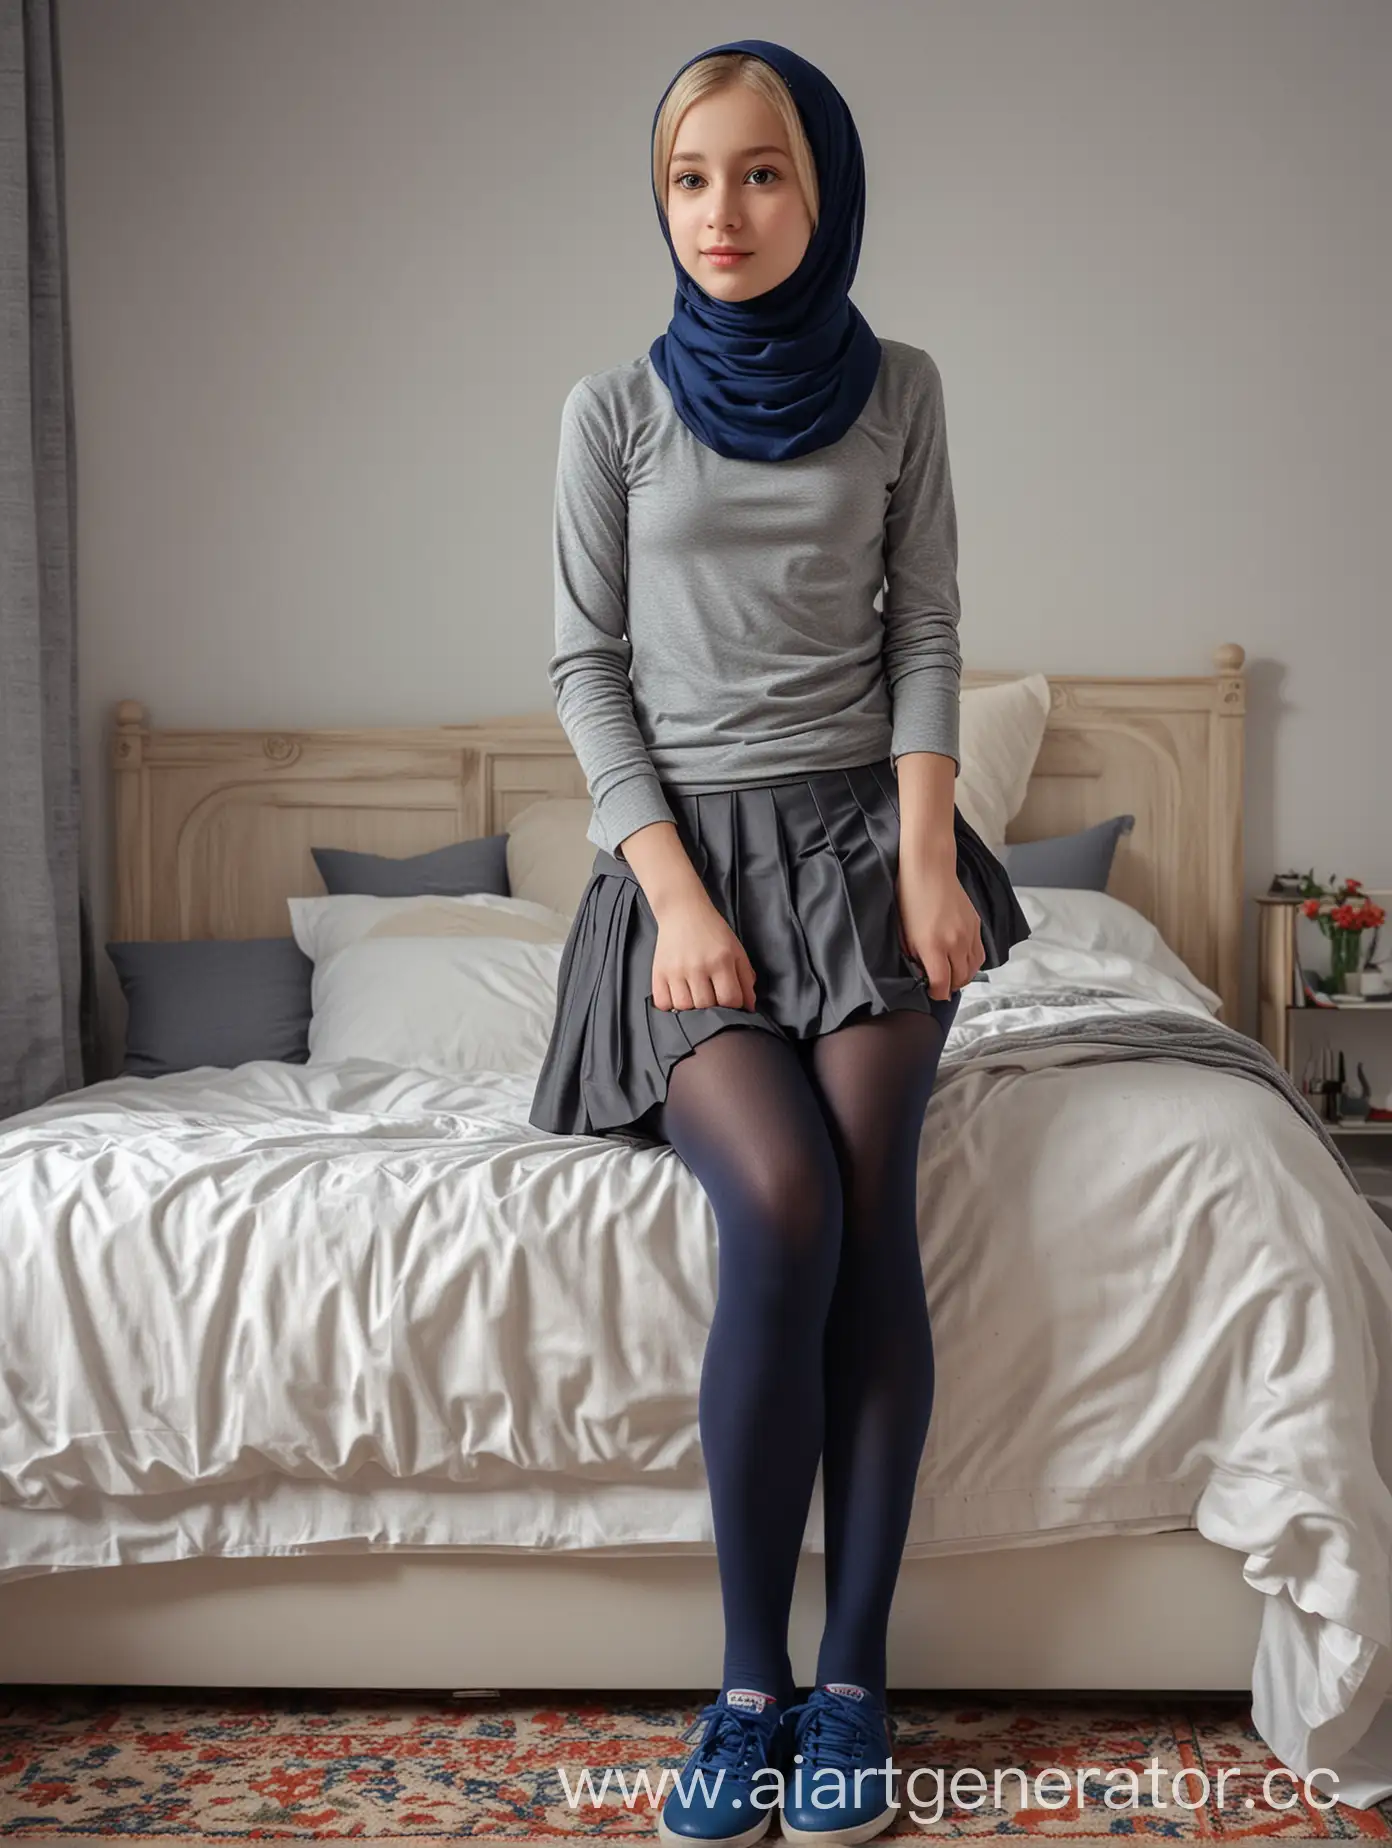 A girl wear a hijab. The girl is 12 years old. She is so beautiful girl. She wears a mini school skirt, navy blue opaque tights, sport shoes. Slim legs. Sits the bed. Petite, cute. Russian. Ultra Realistic face. Close-up body. She most beautiful girl in the world.